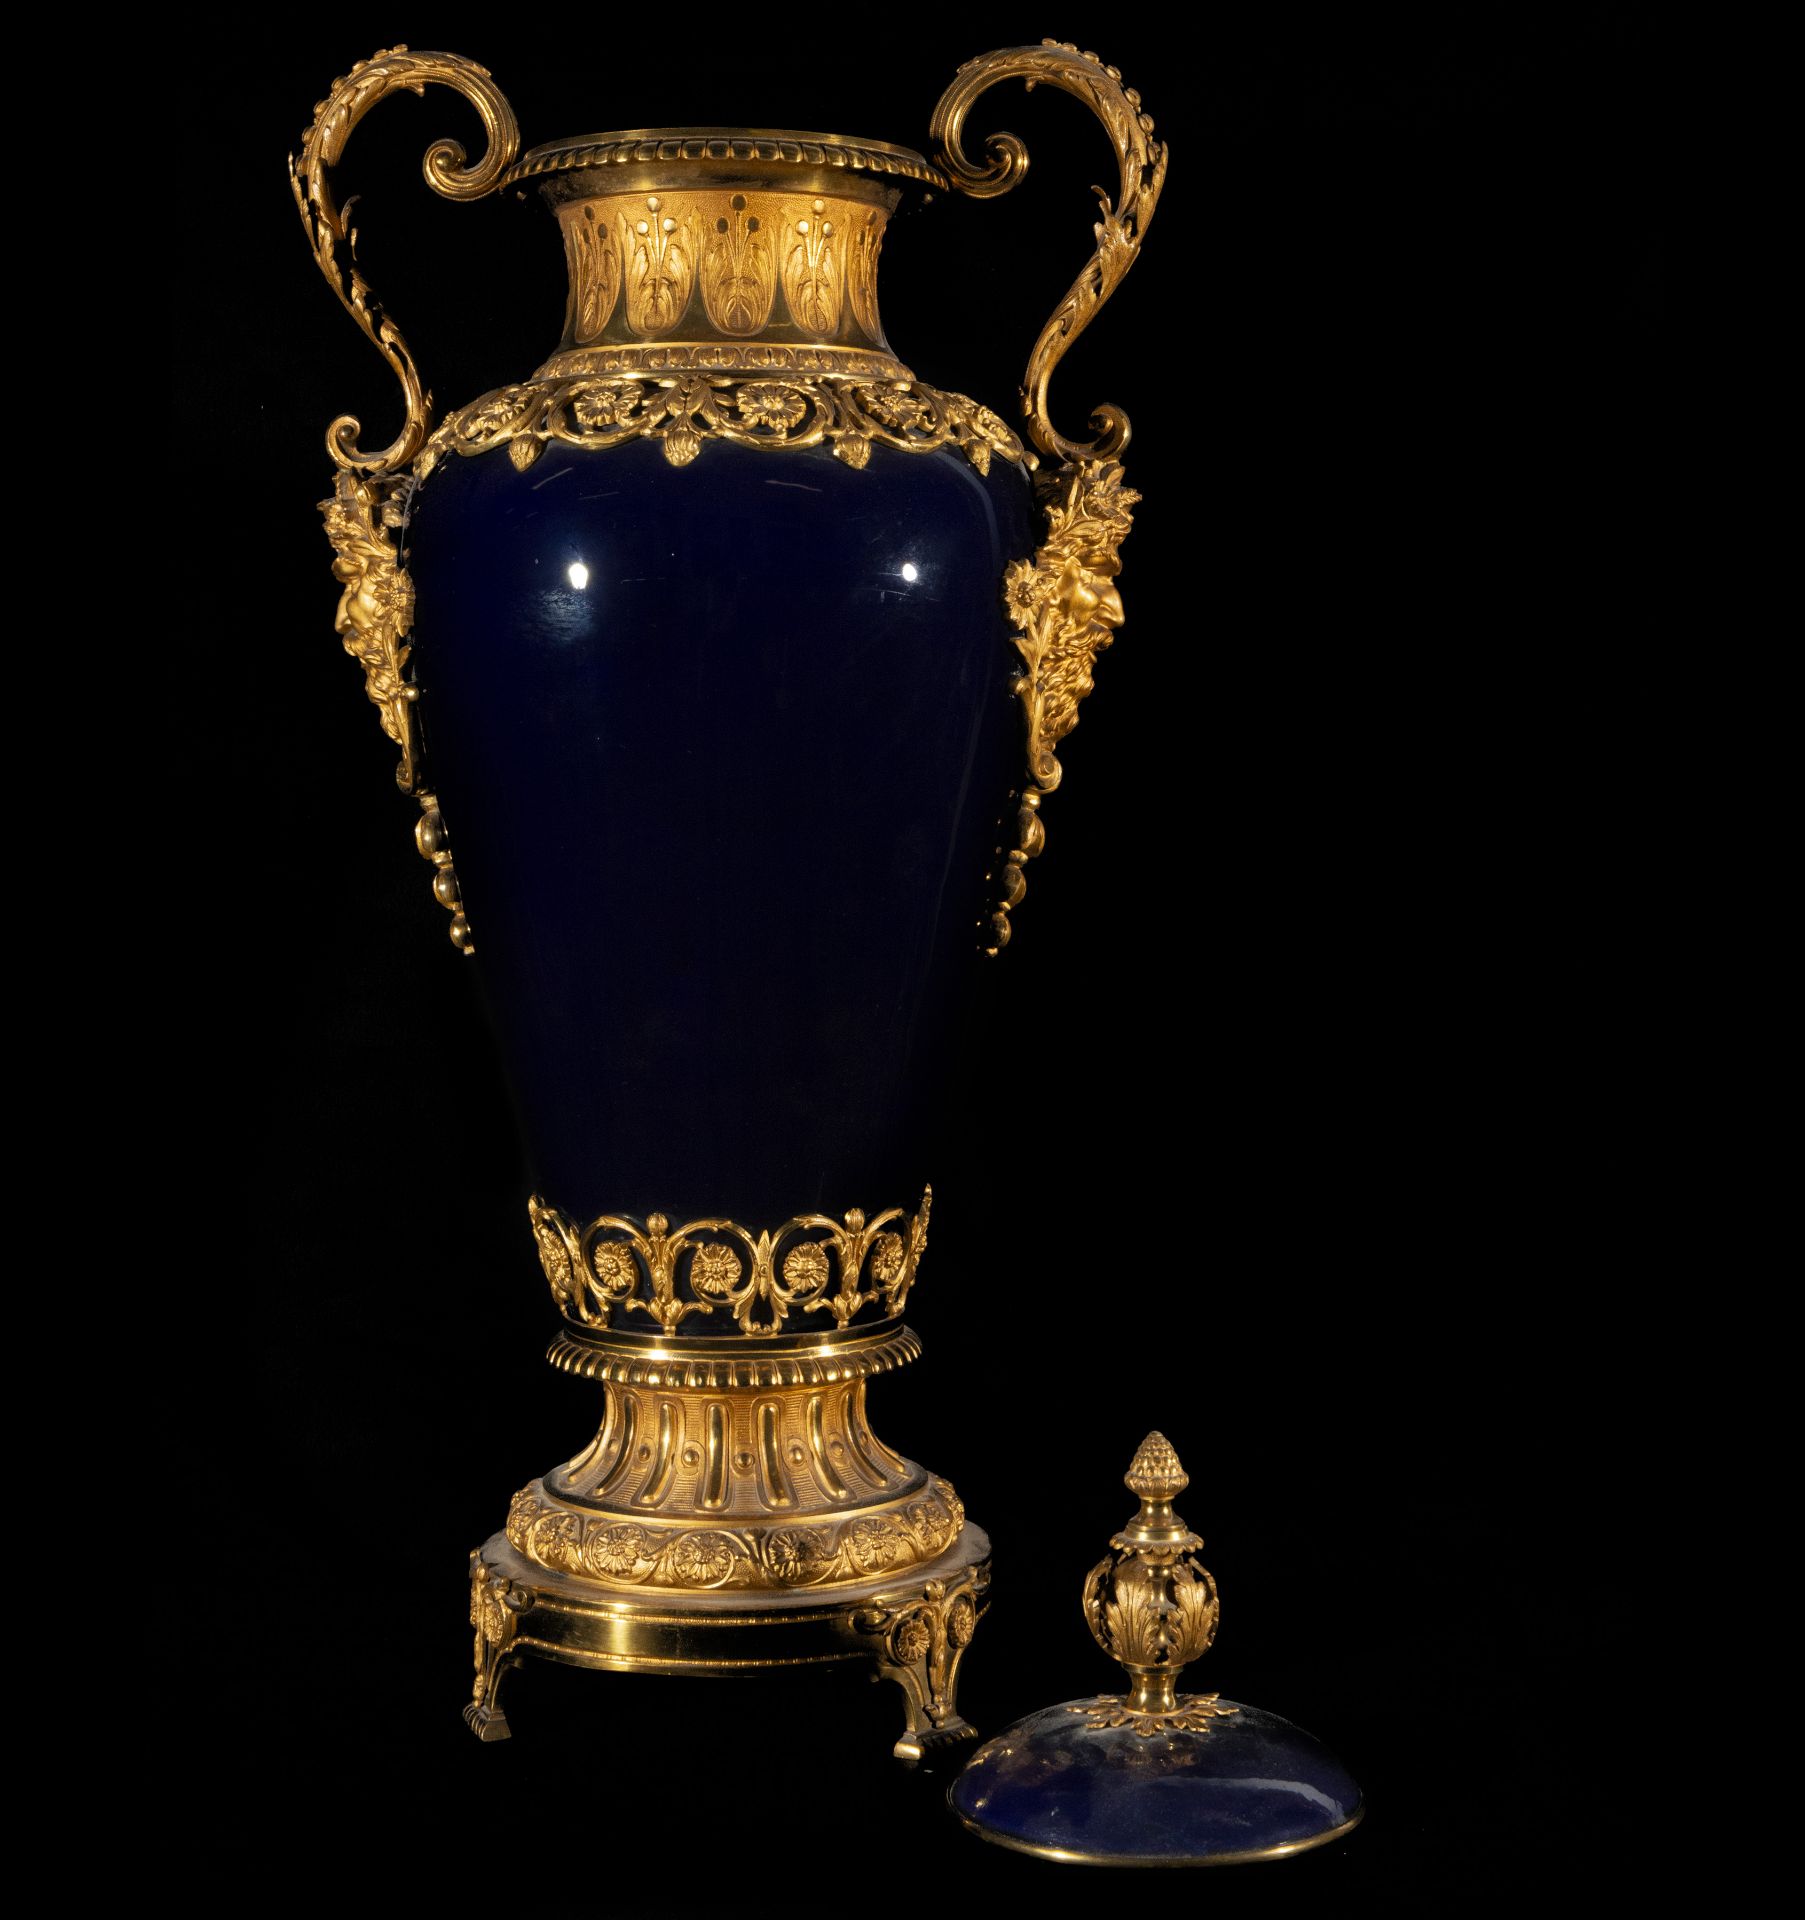 Pair of Large Sevres Vases in "Bleu Celeste" porcelain from the 19th century - Image 7 of 9